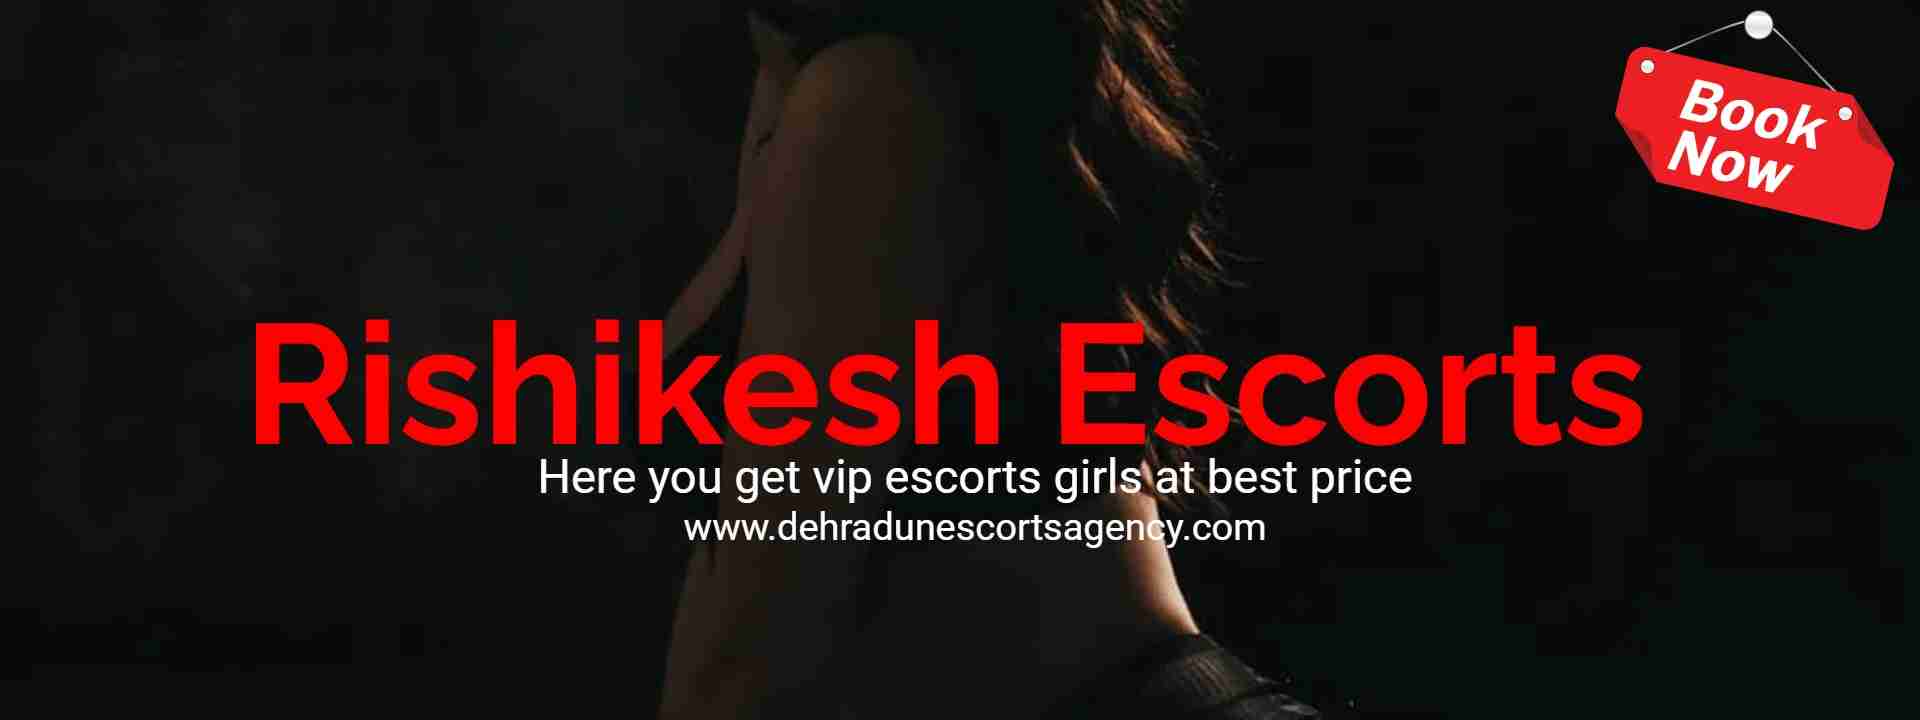 You are currently viewing Procedure of Booking Rishikesh Escorts best babes